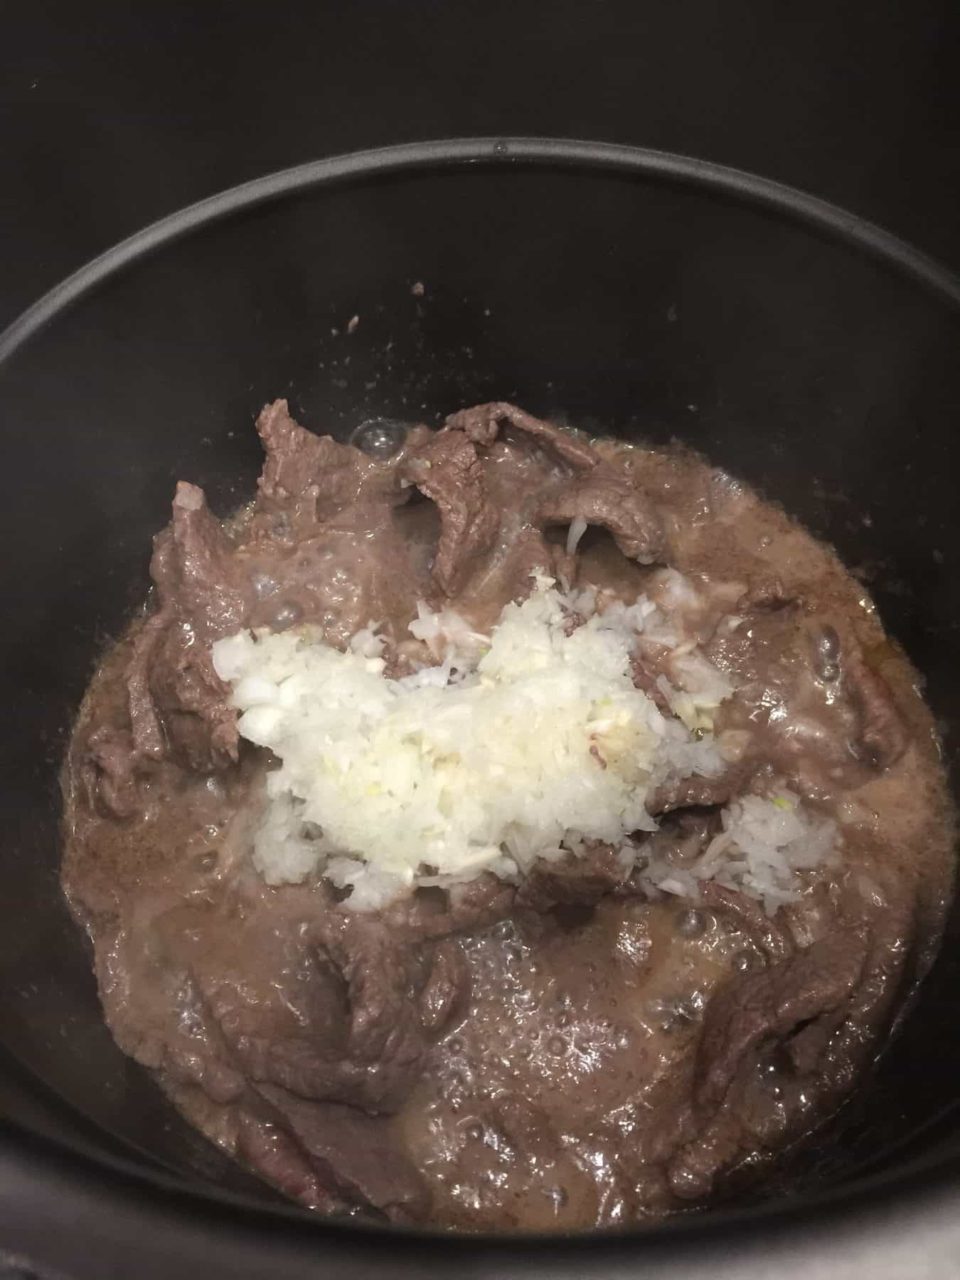 Raw onions and garlic added to beef slices in instant pot for Instant Pot Beef with Broccoli